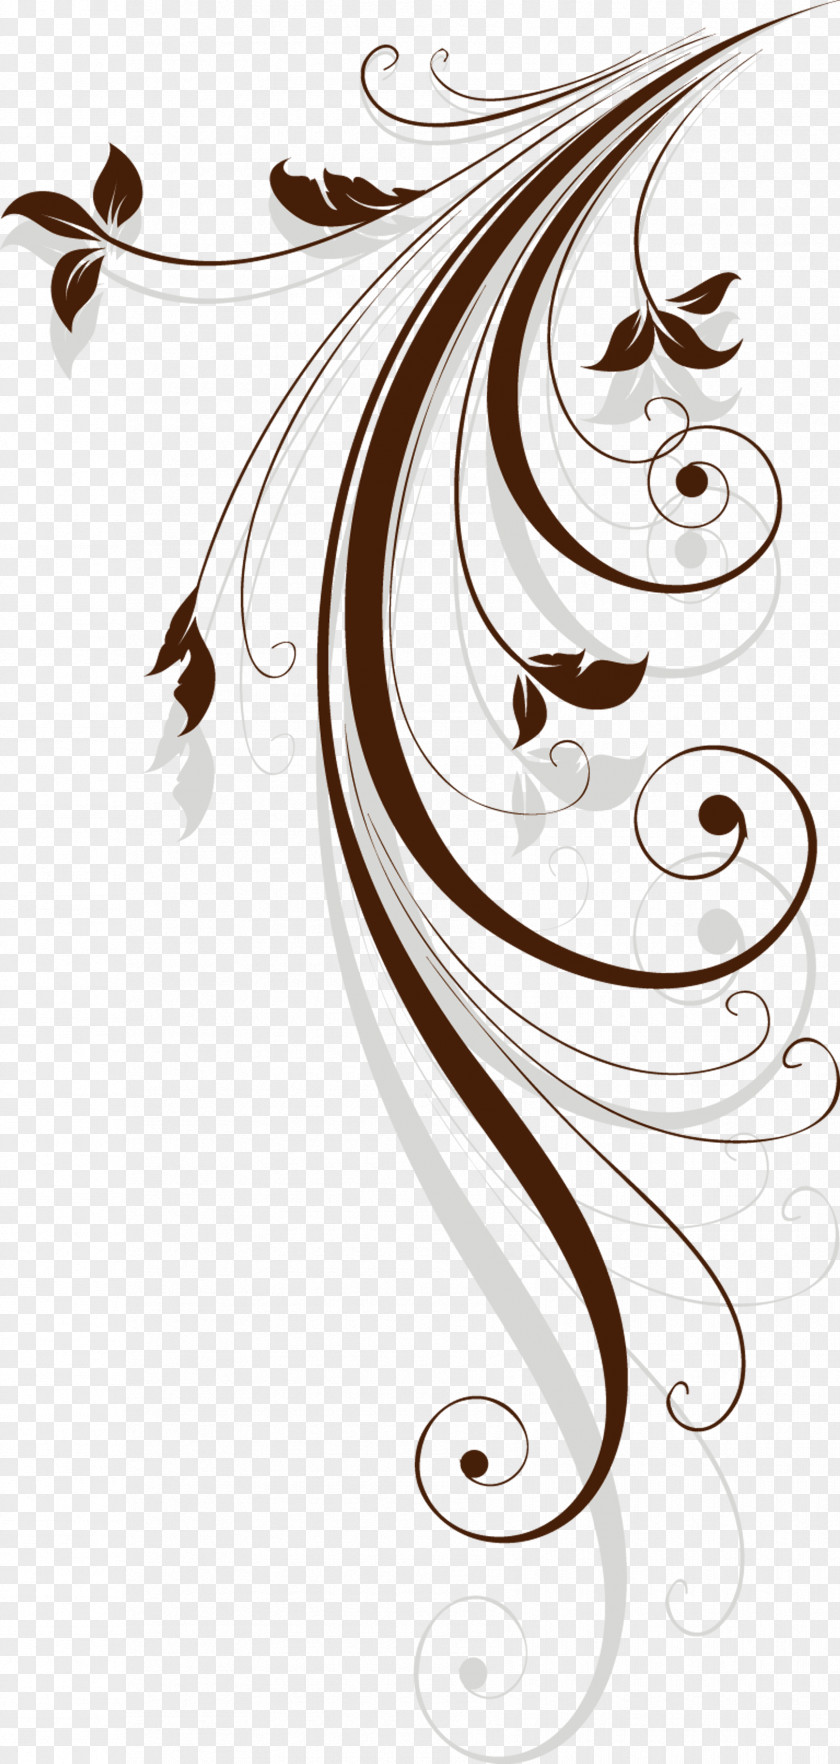 Lace PNG clipart PNG